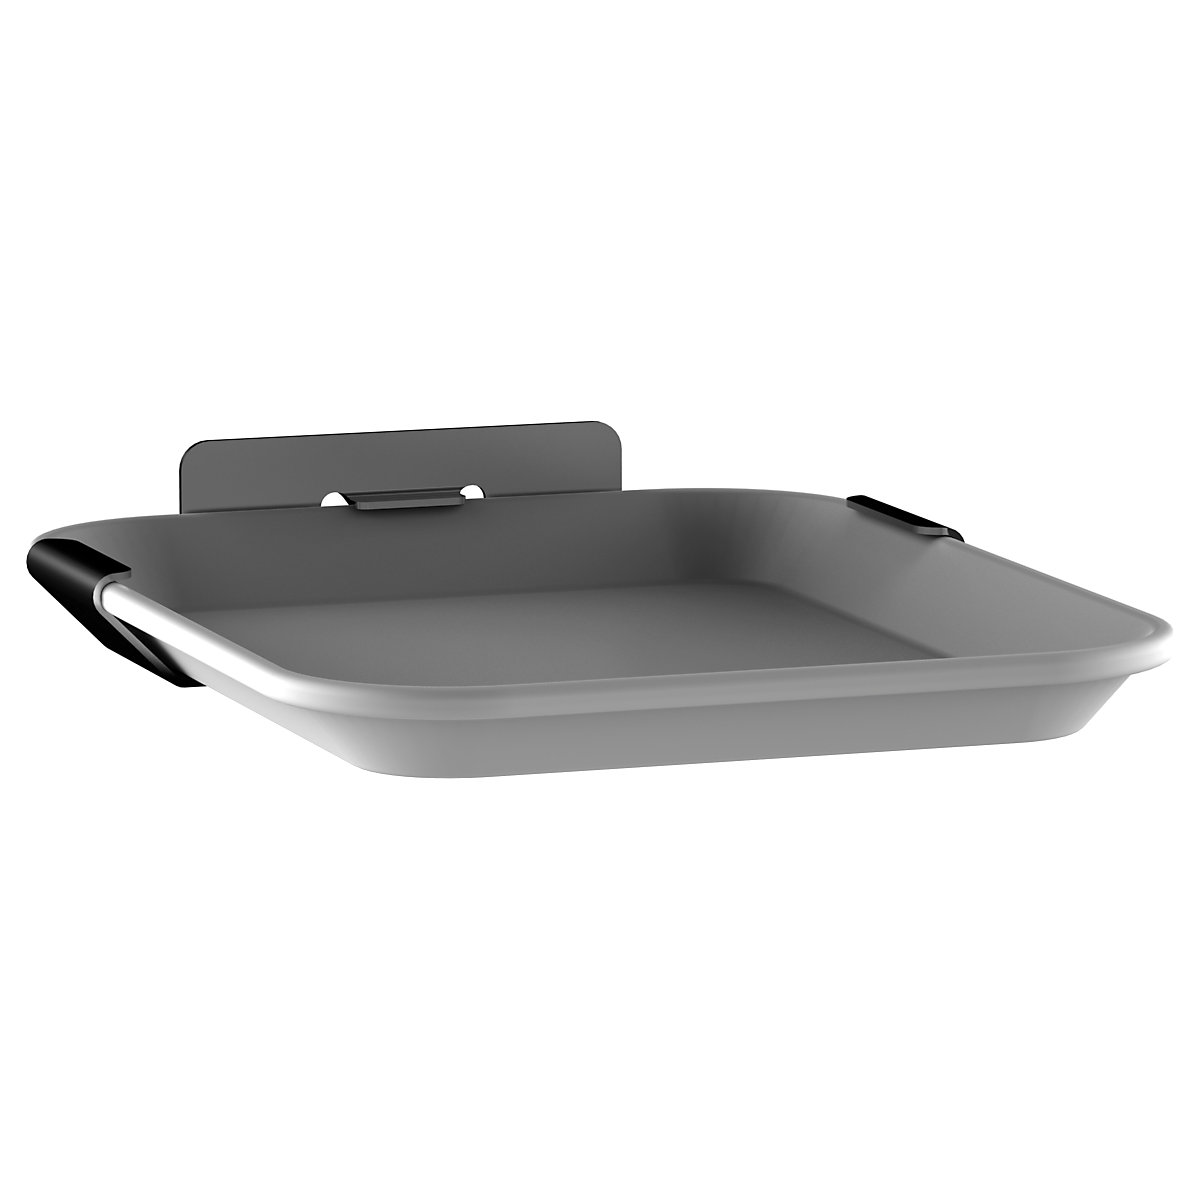 Drip tray for soap and disinfectant dispensers